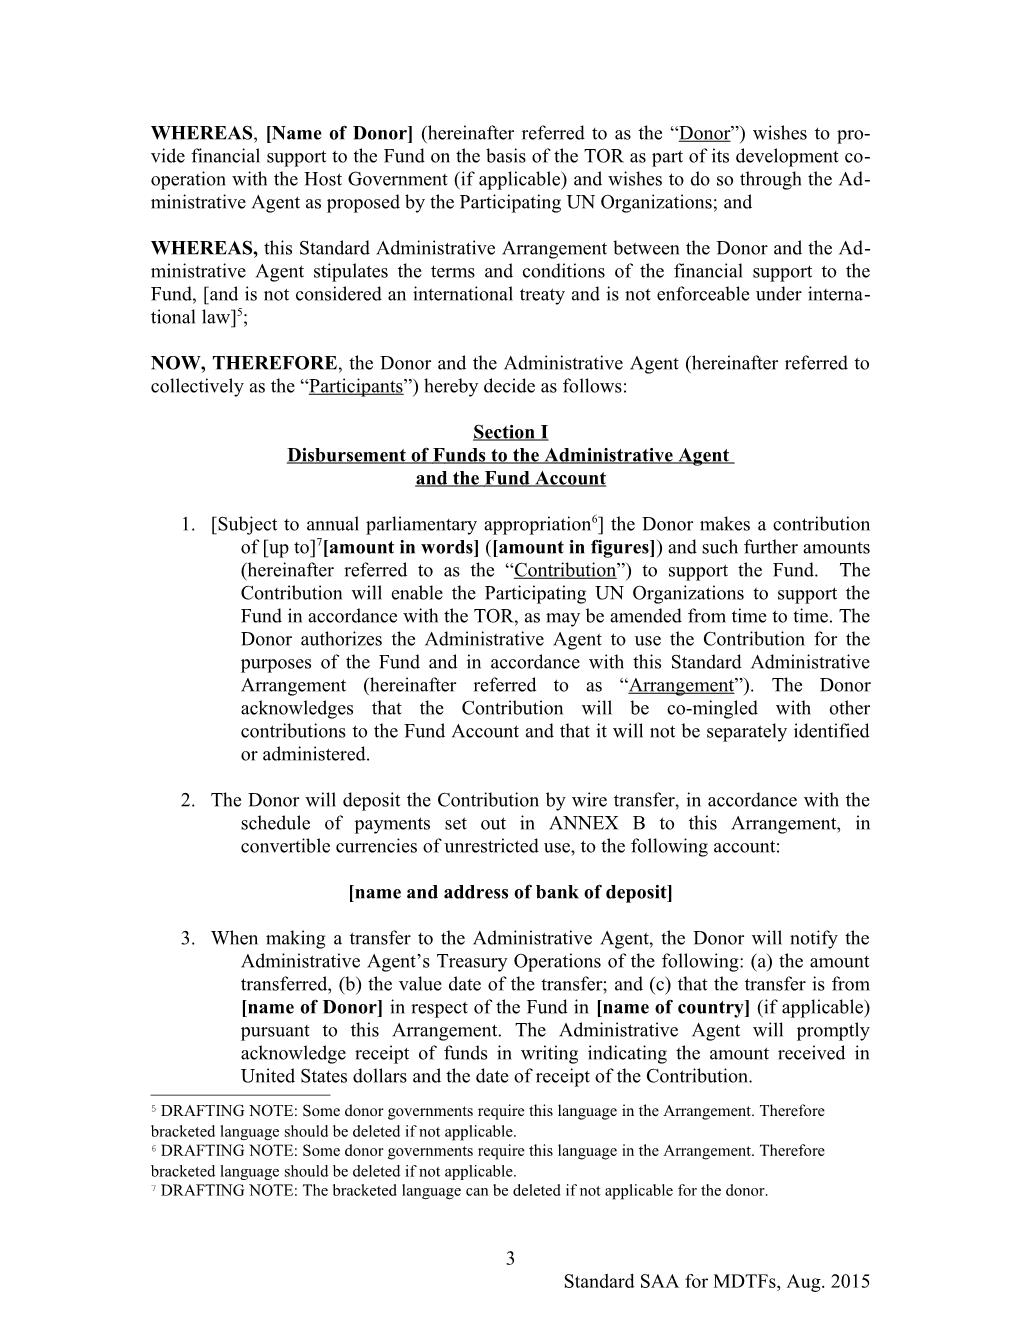 Guidance Note on Joint Programming 19 December 2003